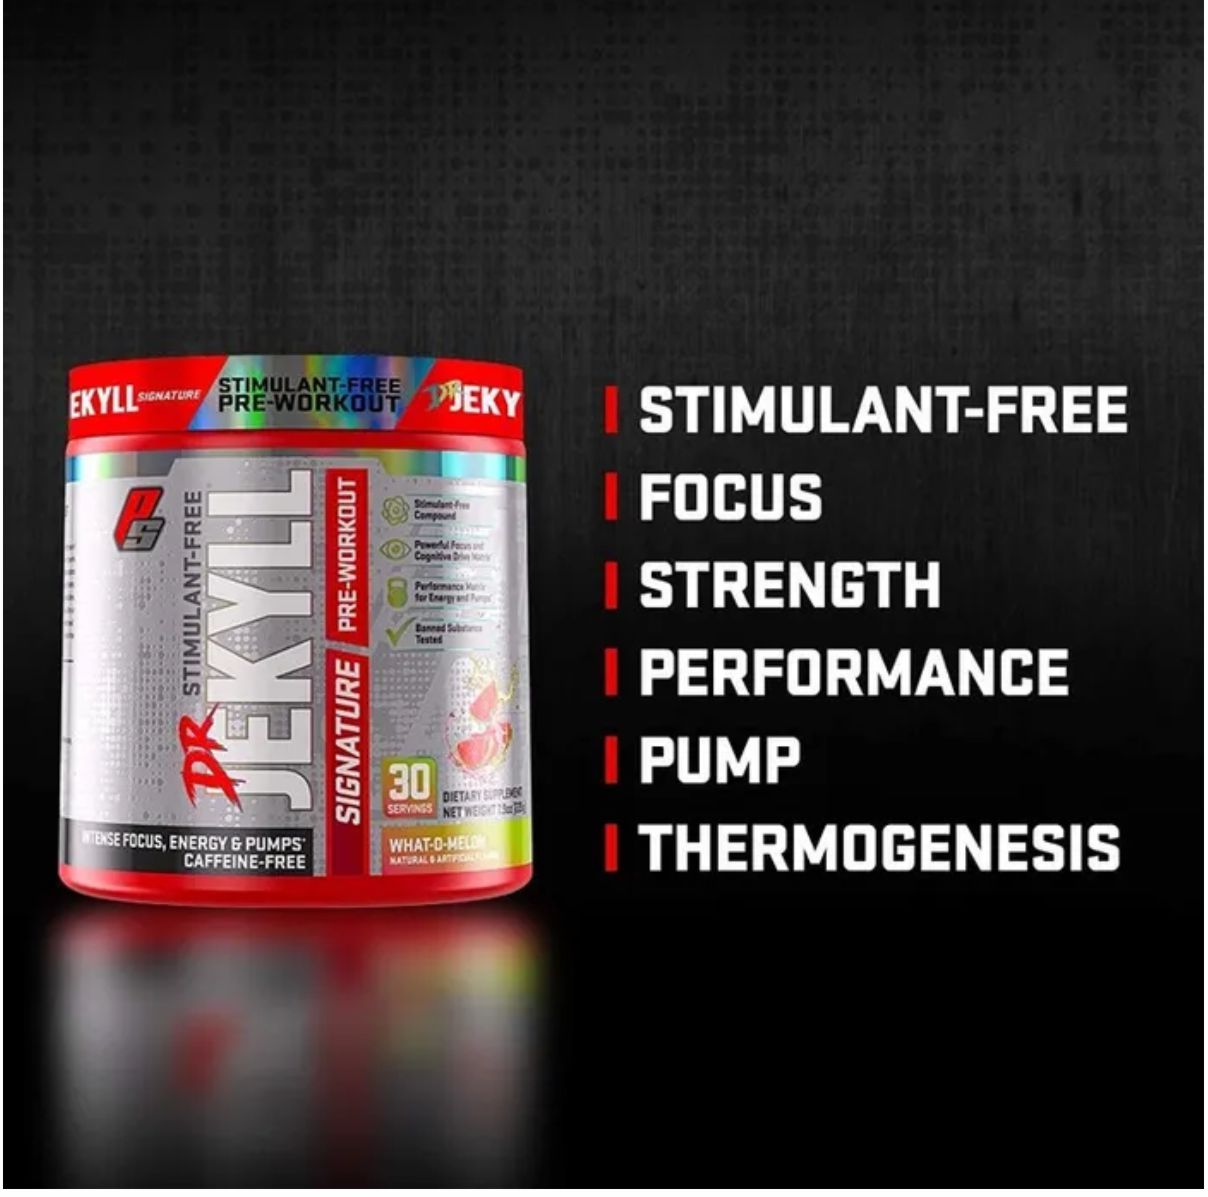 ProSupps Dr. Jekyll Signature Pre-Workout 30 Servings